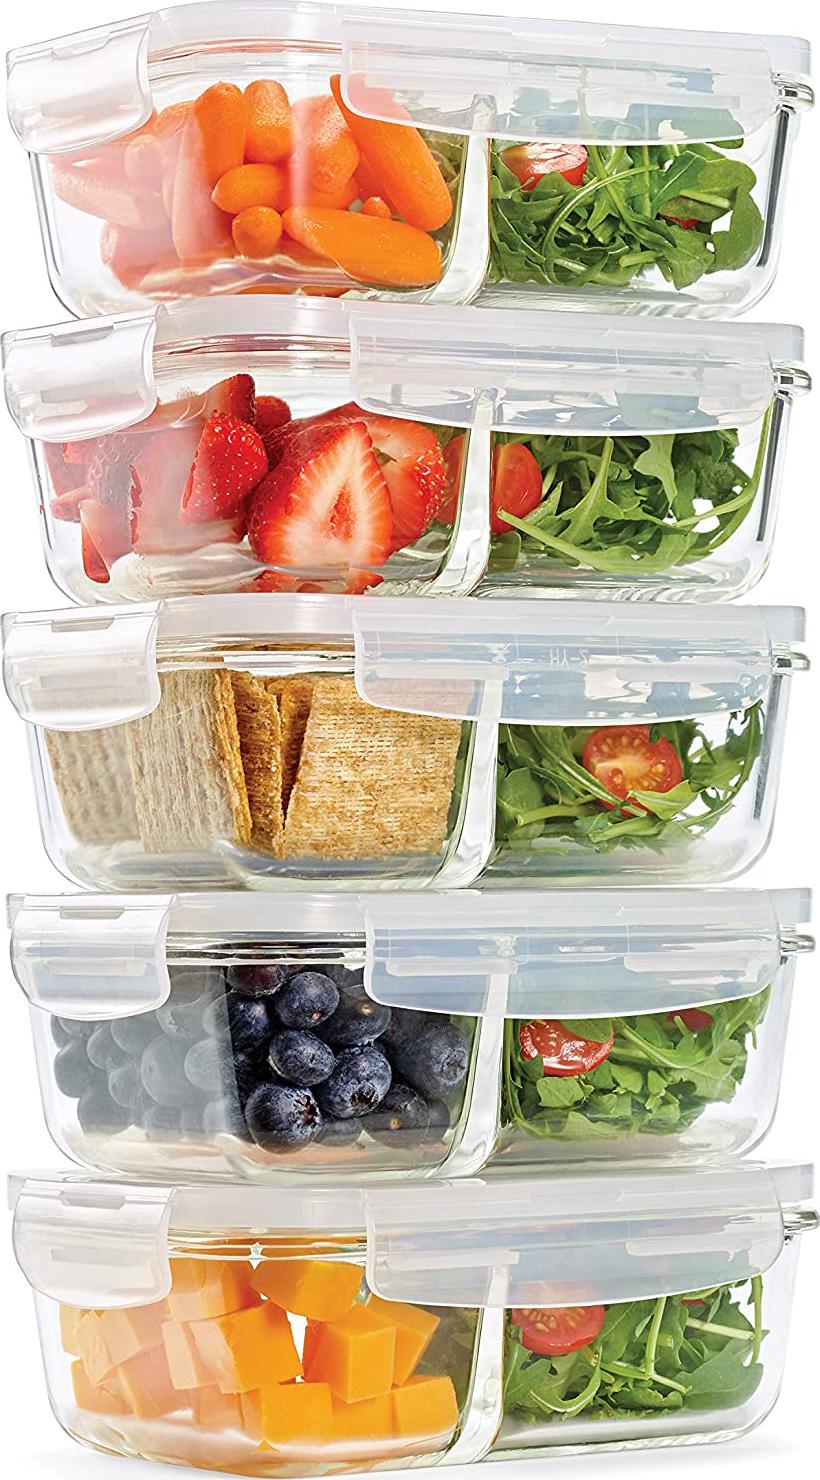 Fit & Fresh, Fit and Fresh Divided Glass Containers, 5-Pack, Two Compartments, Set of 5 Containers with Locking Lids, Glass Storage, Meal Prep Containers with Airtight Seal, 27 oz.